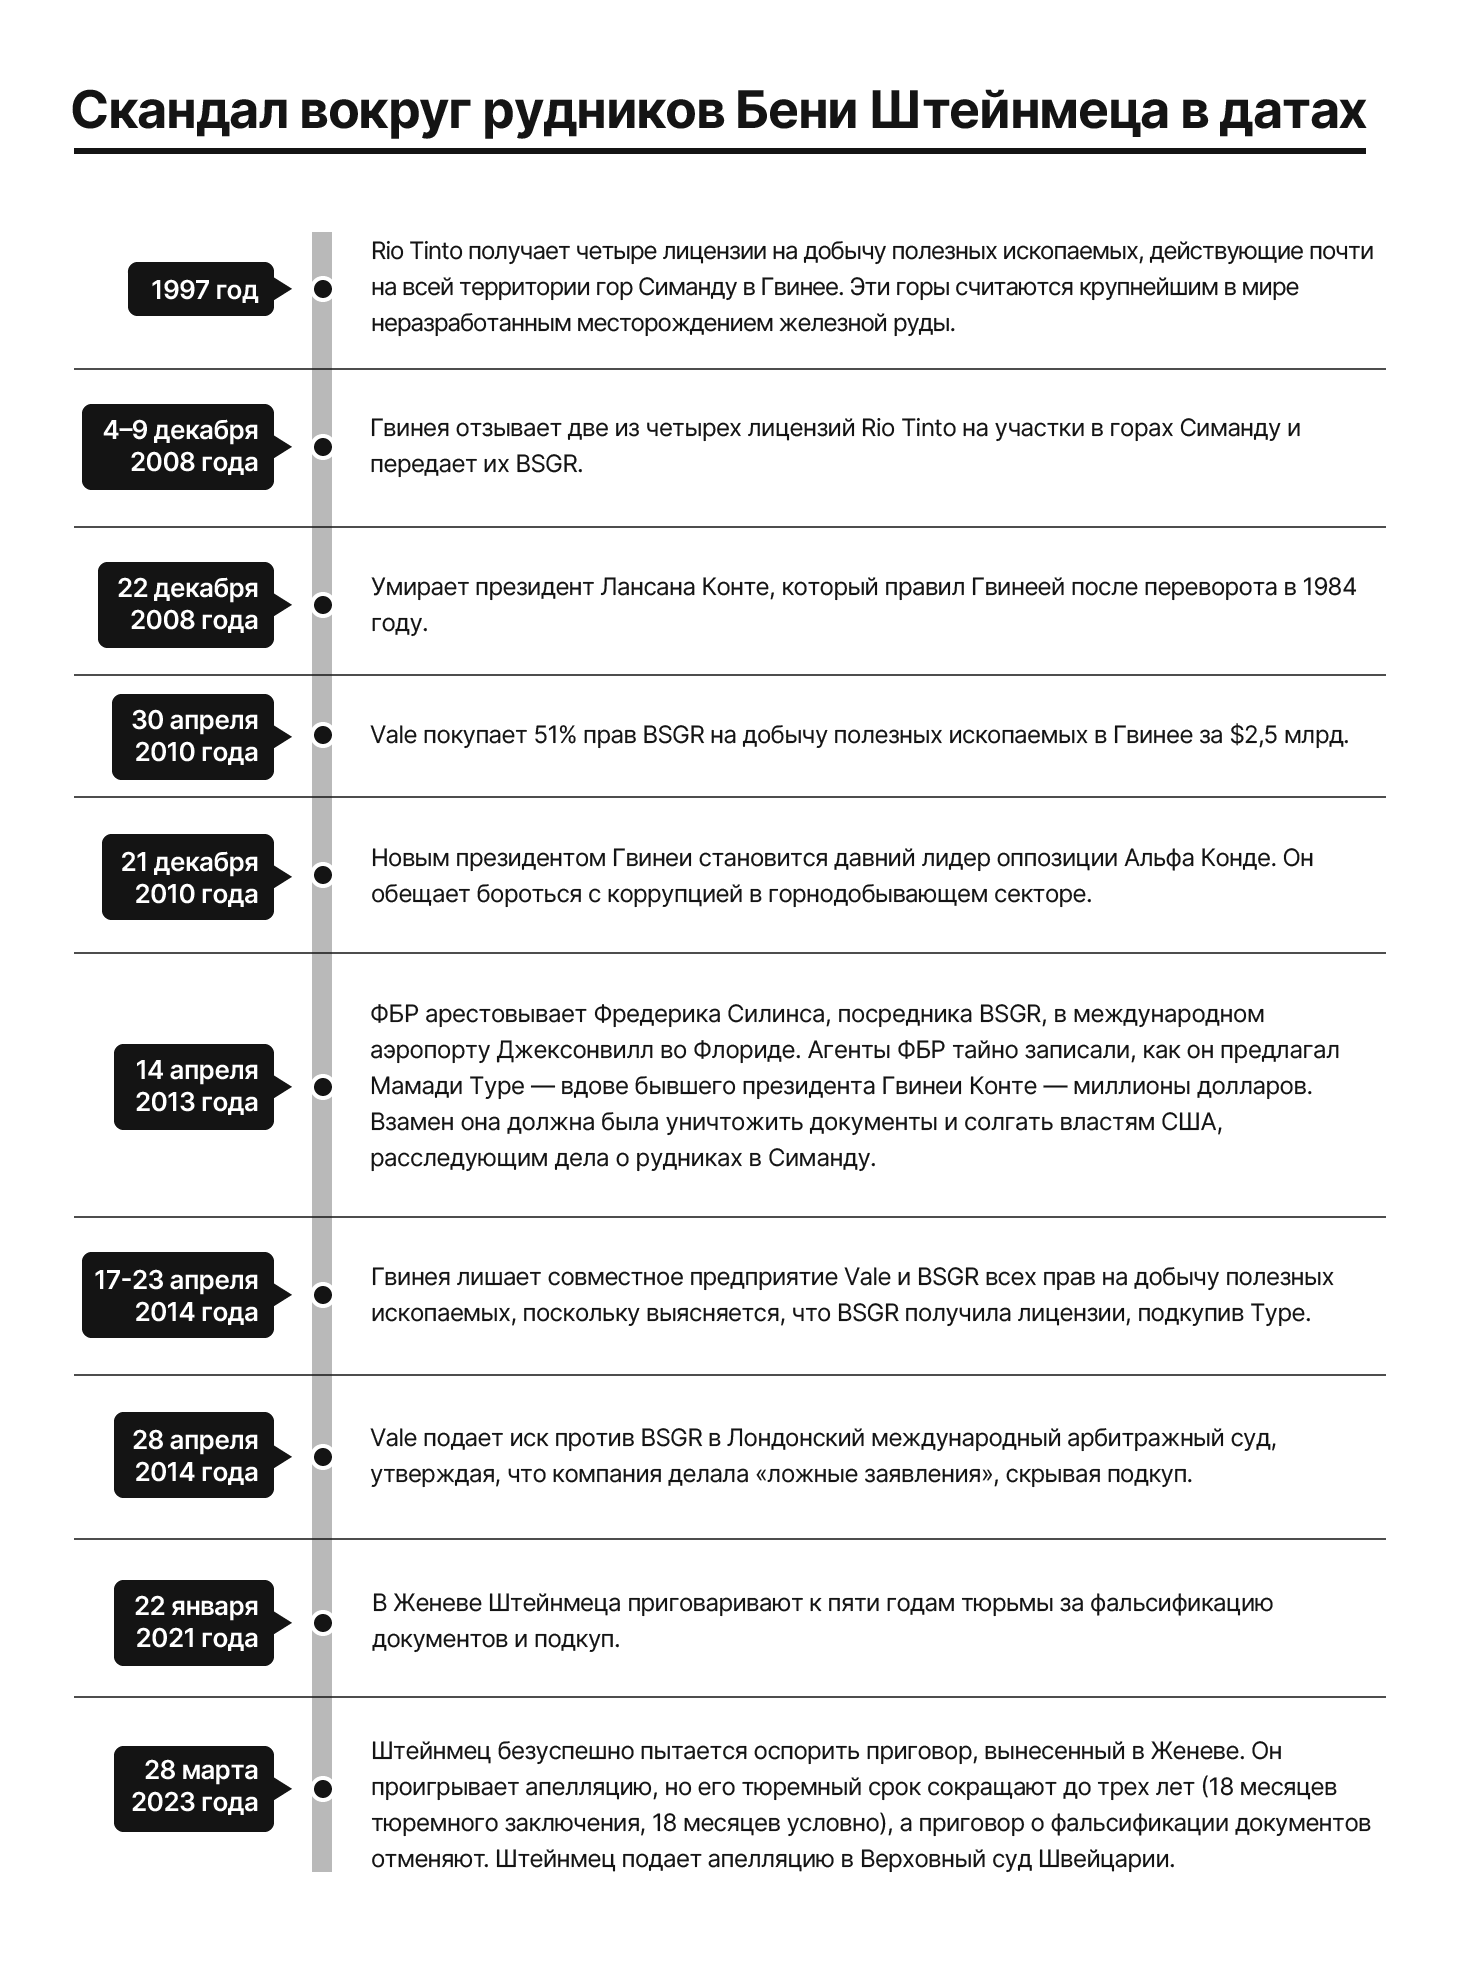 the-steinmetz-scandals/simandou-scandal-timeline-rus.png